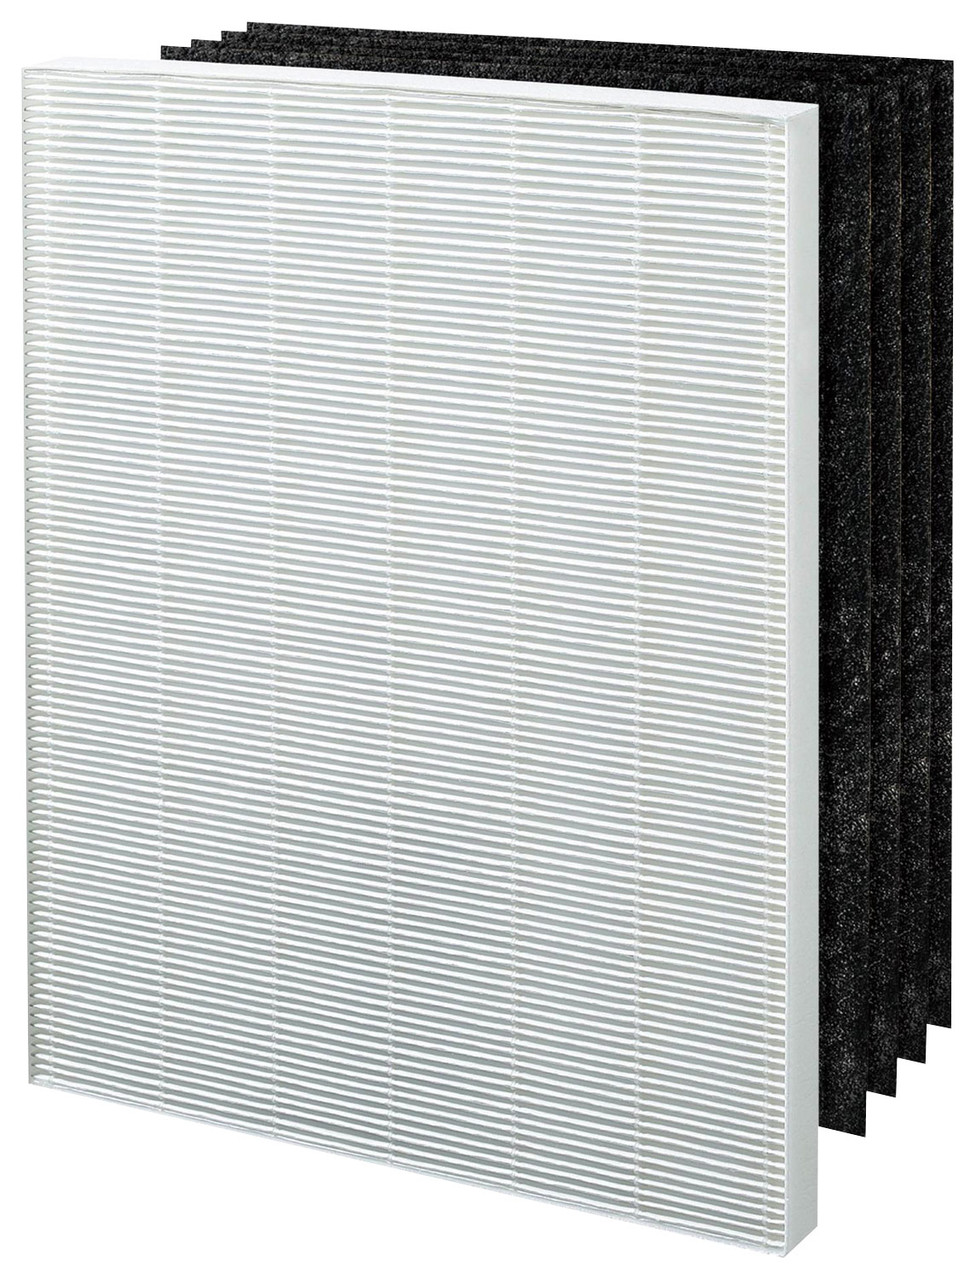 WINIX - Replacement Filter Set for Winix P300, 5300, 5500 and 6300 Air Cleaners - Black/White